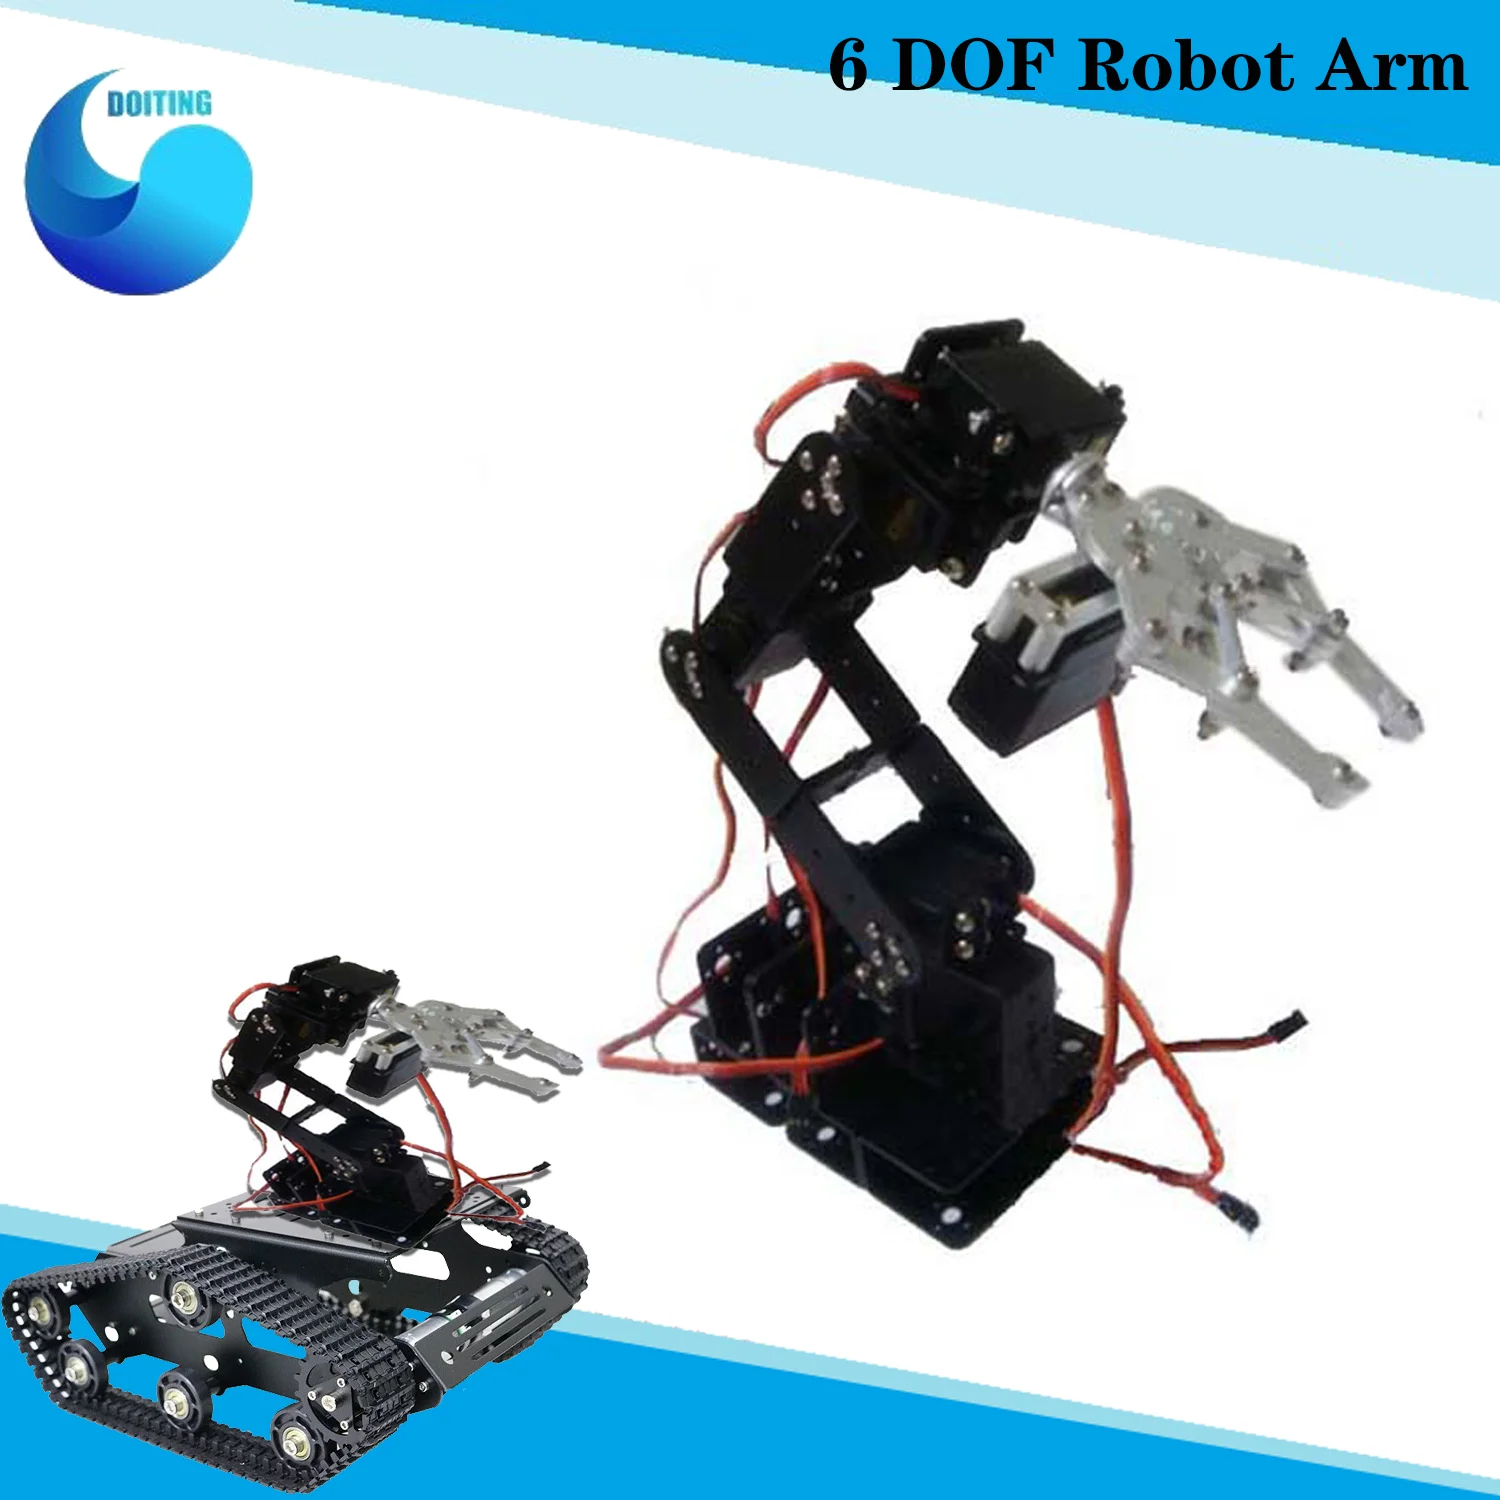 6-axis-industrial-robot-arm-cnc-robot-arm-mechanical-claws-large-metal-base-full-metal-mechanical-manipulator-servo-for-arduino